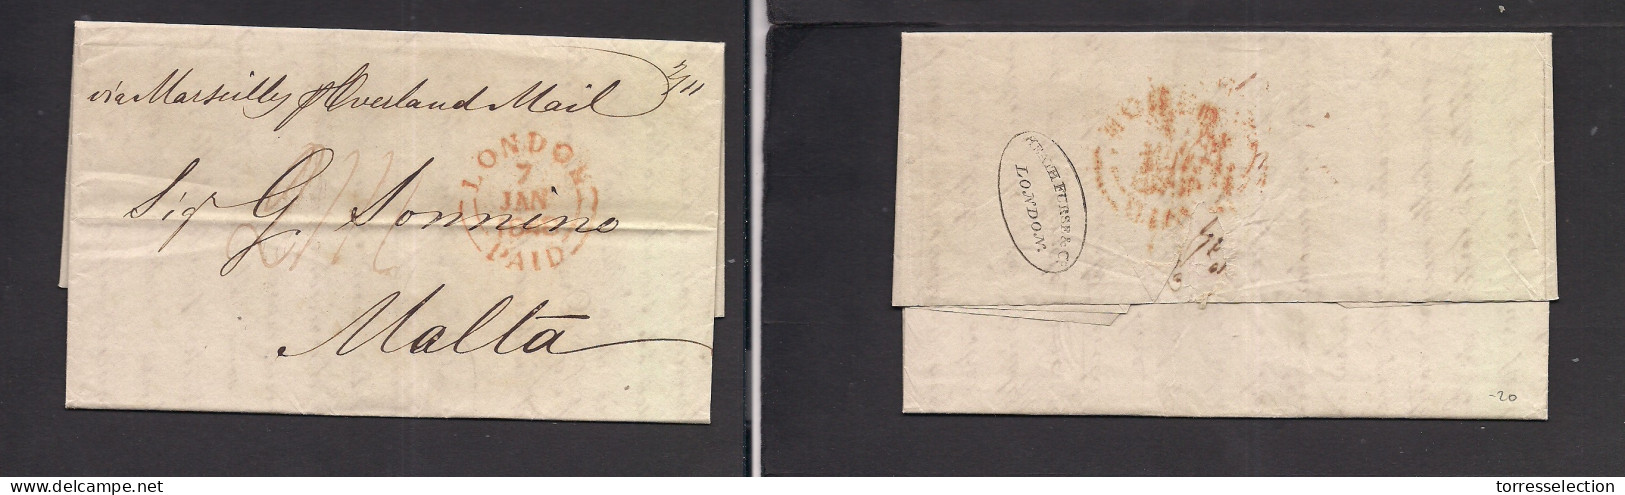 GREAT BRITAIN. 1848 (7 Jan) London - Malta. EL With Text Via Marseille + Red London / Paid Large Cds + Mns Charge. VF. X - ...-1840 Precursores